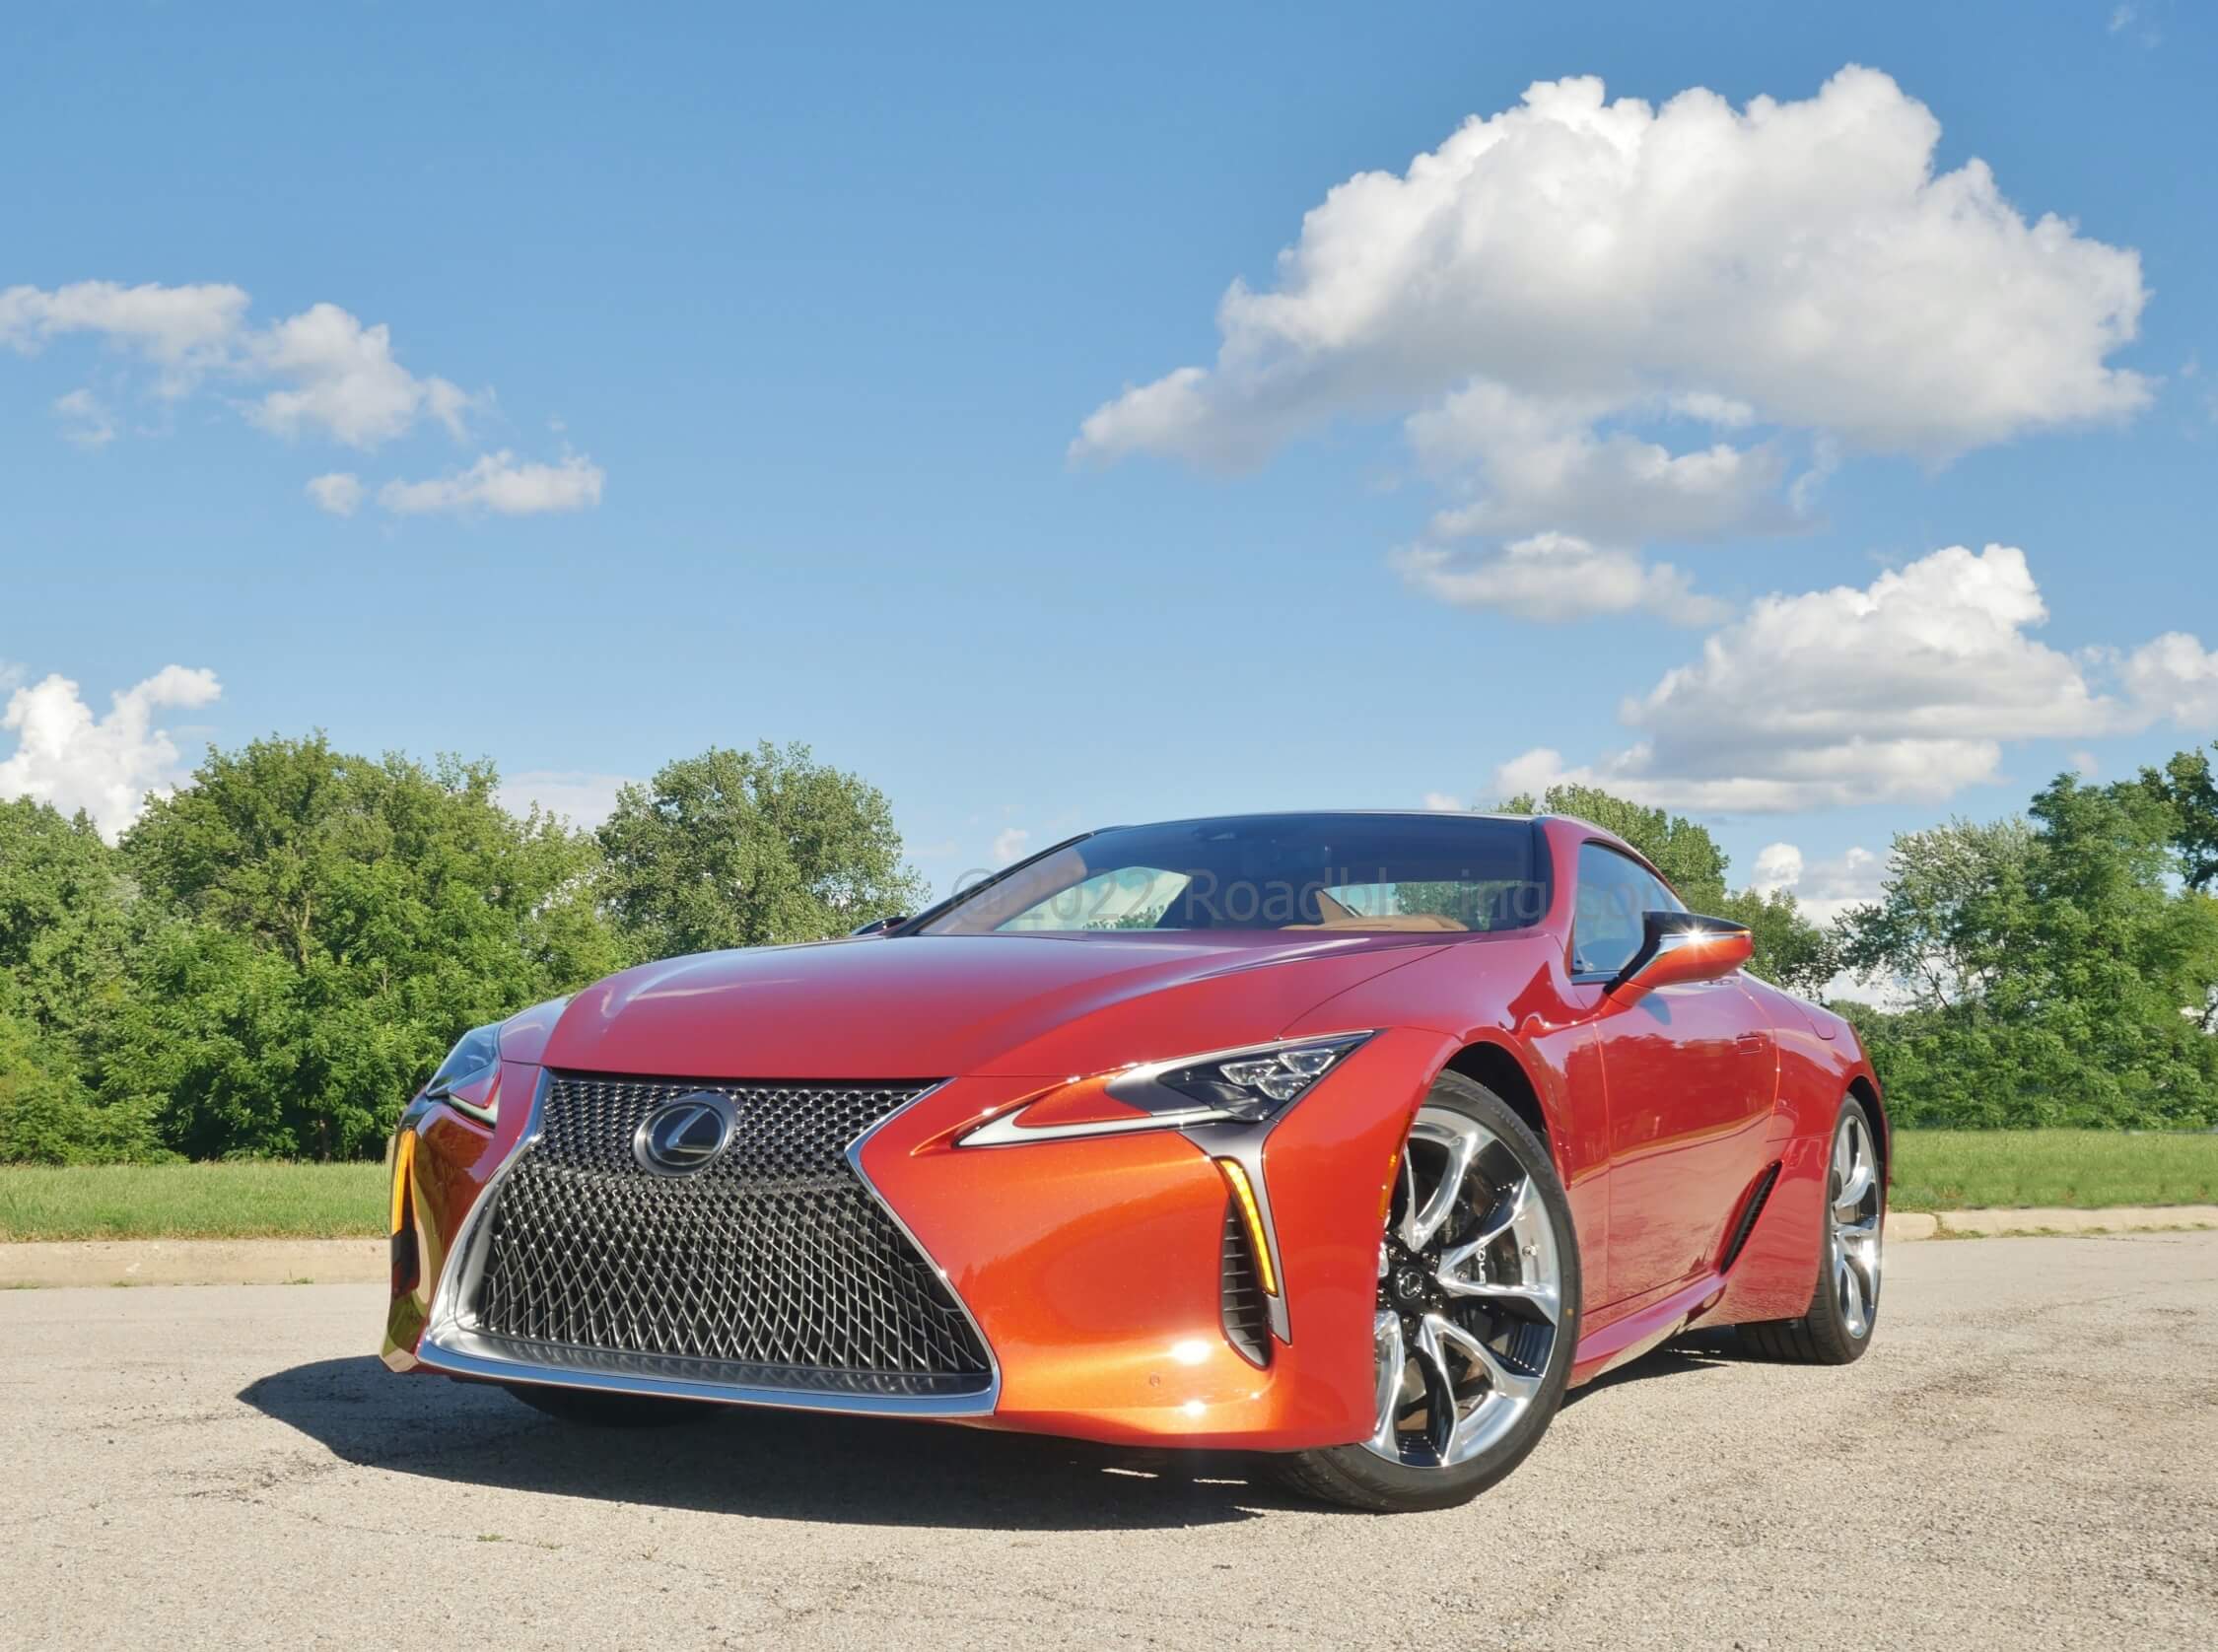 2022 Lexus LC 500: this flagship high performance 2+2 coupe has earned the right to boast with the imposing Lexus Spindle grille